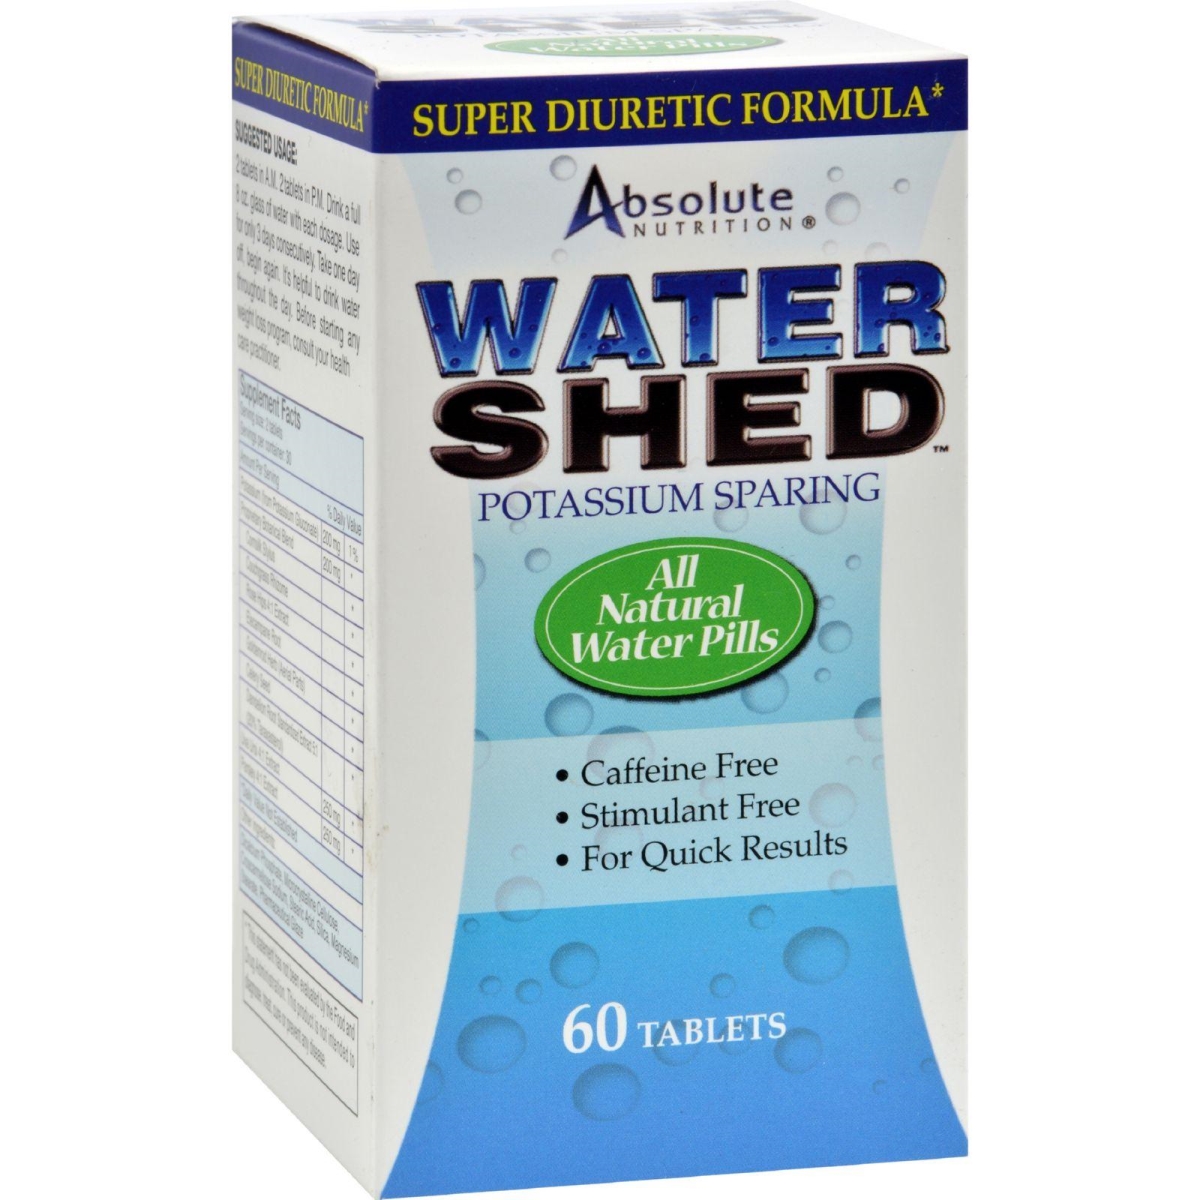 Hg0108928 Watershed, 60 Tablets